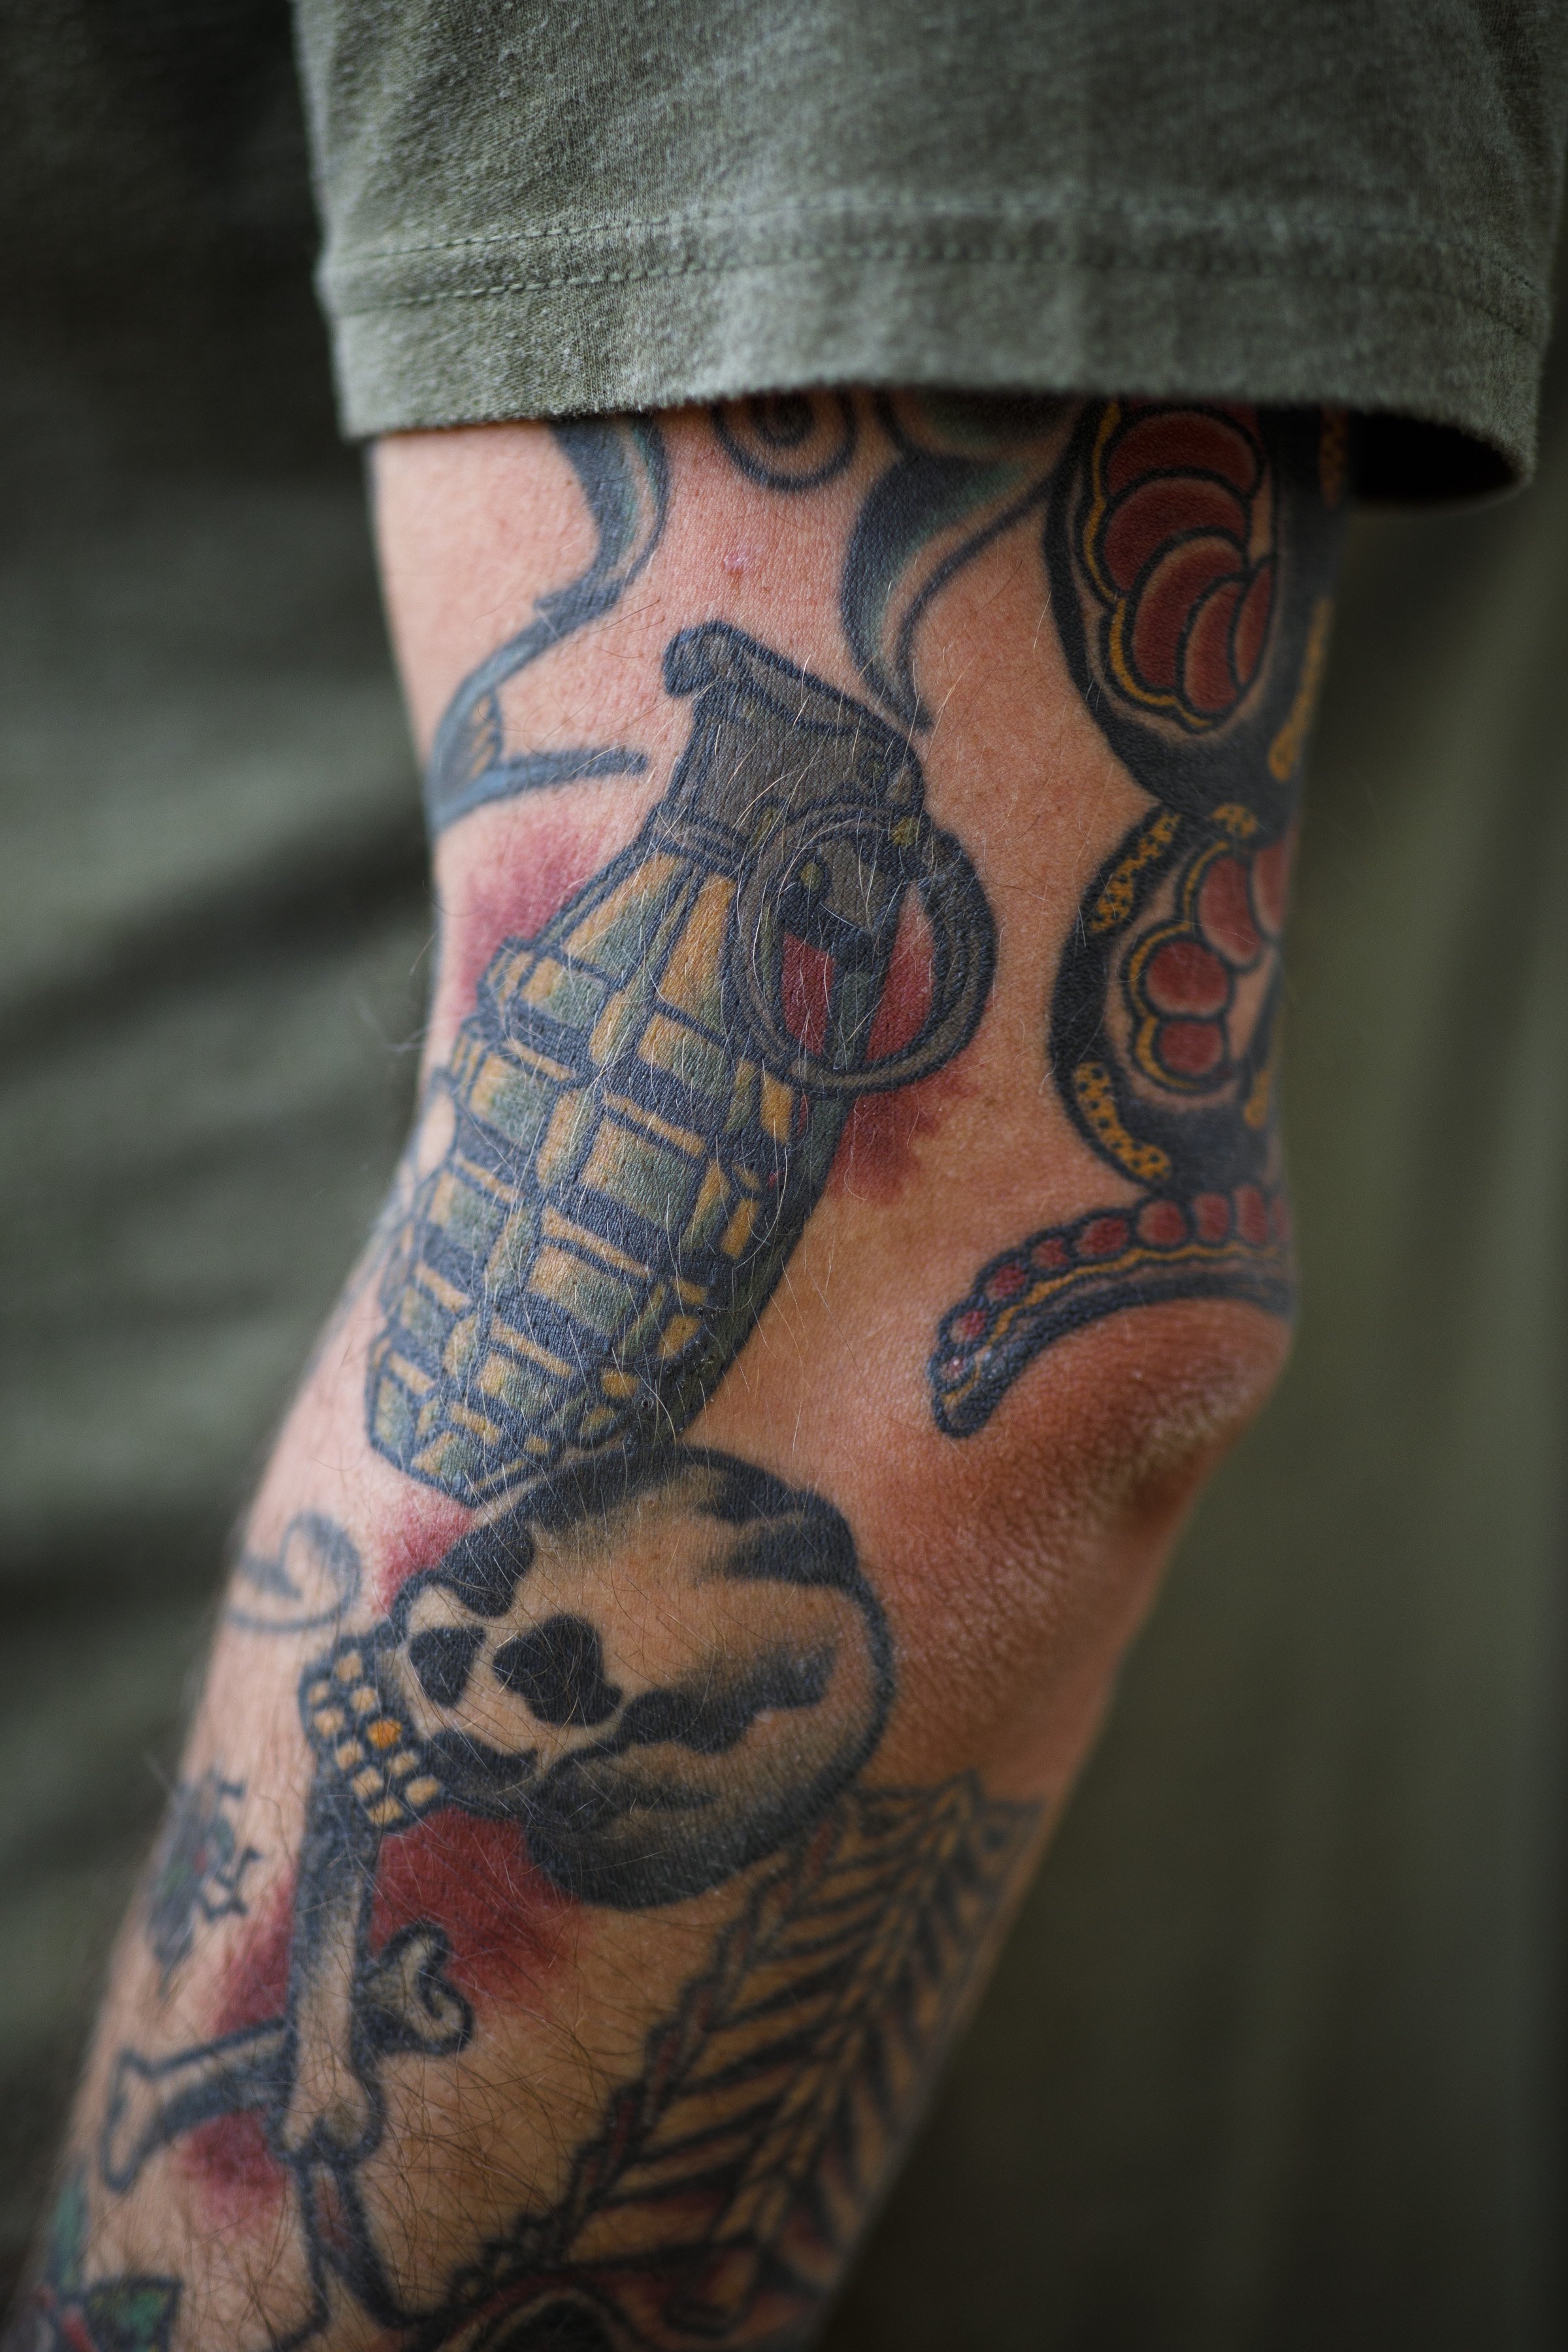  A grenade is tattooed on the arm of Derek Stirk, one of the veterans taking part in the six-week course at Project ComeBack in Holliston, Mass. on August 3, 2022. " It (service) was part of my life, but it's not what defines who I am now," says Stir